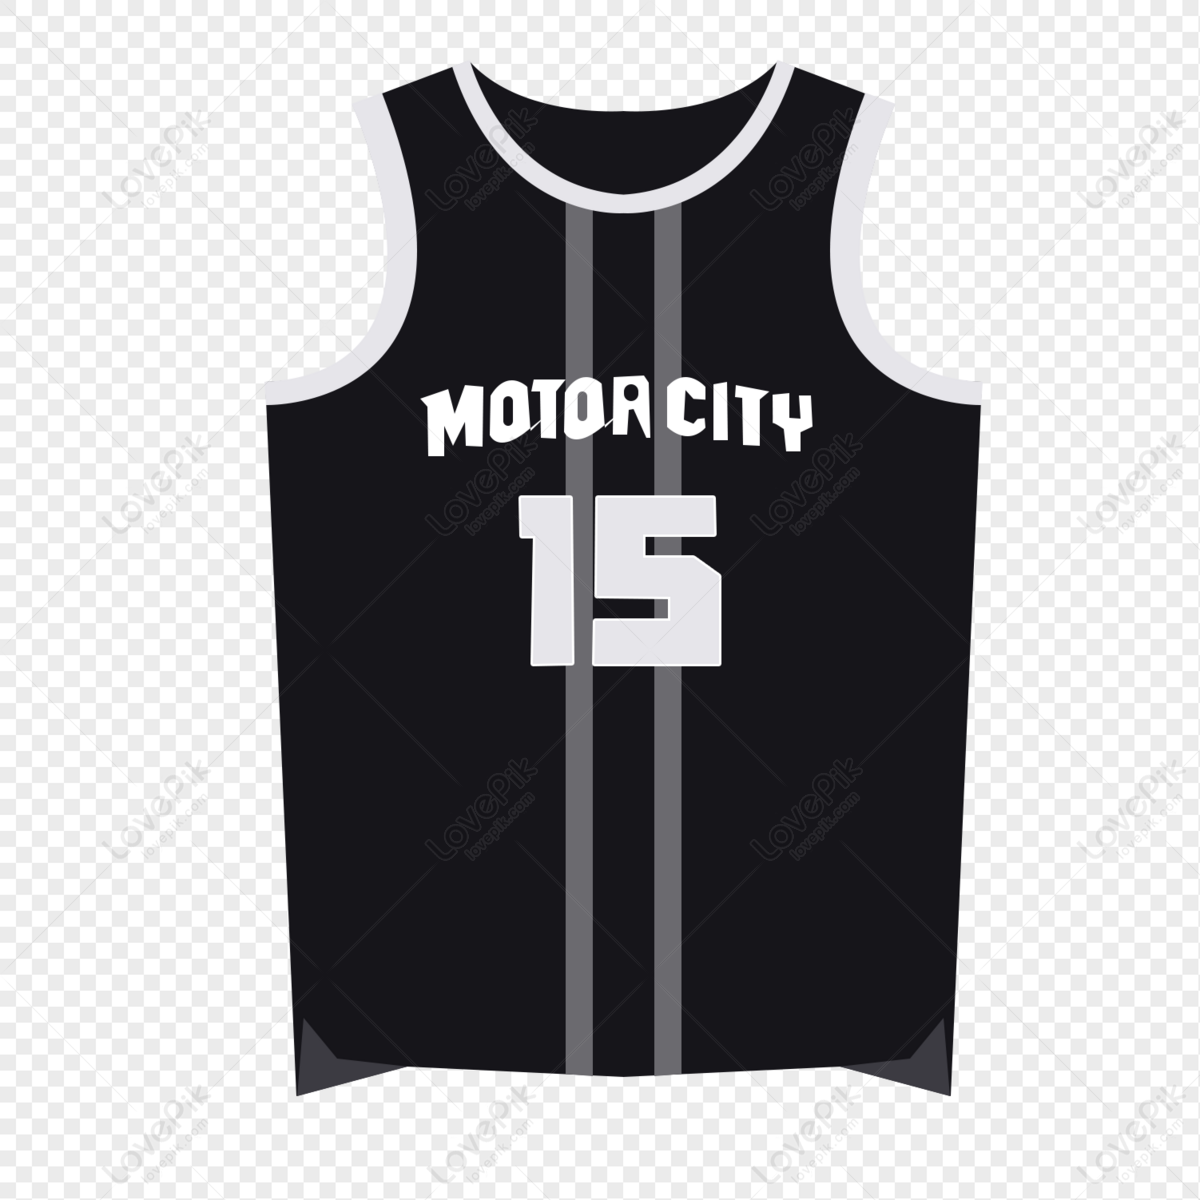 Nba Jersey PNG, Vector, PSD, and Clipart With Transparent